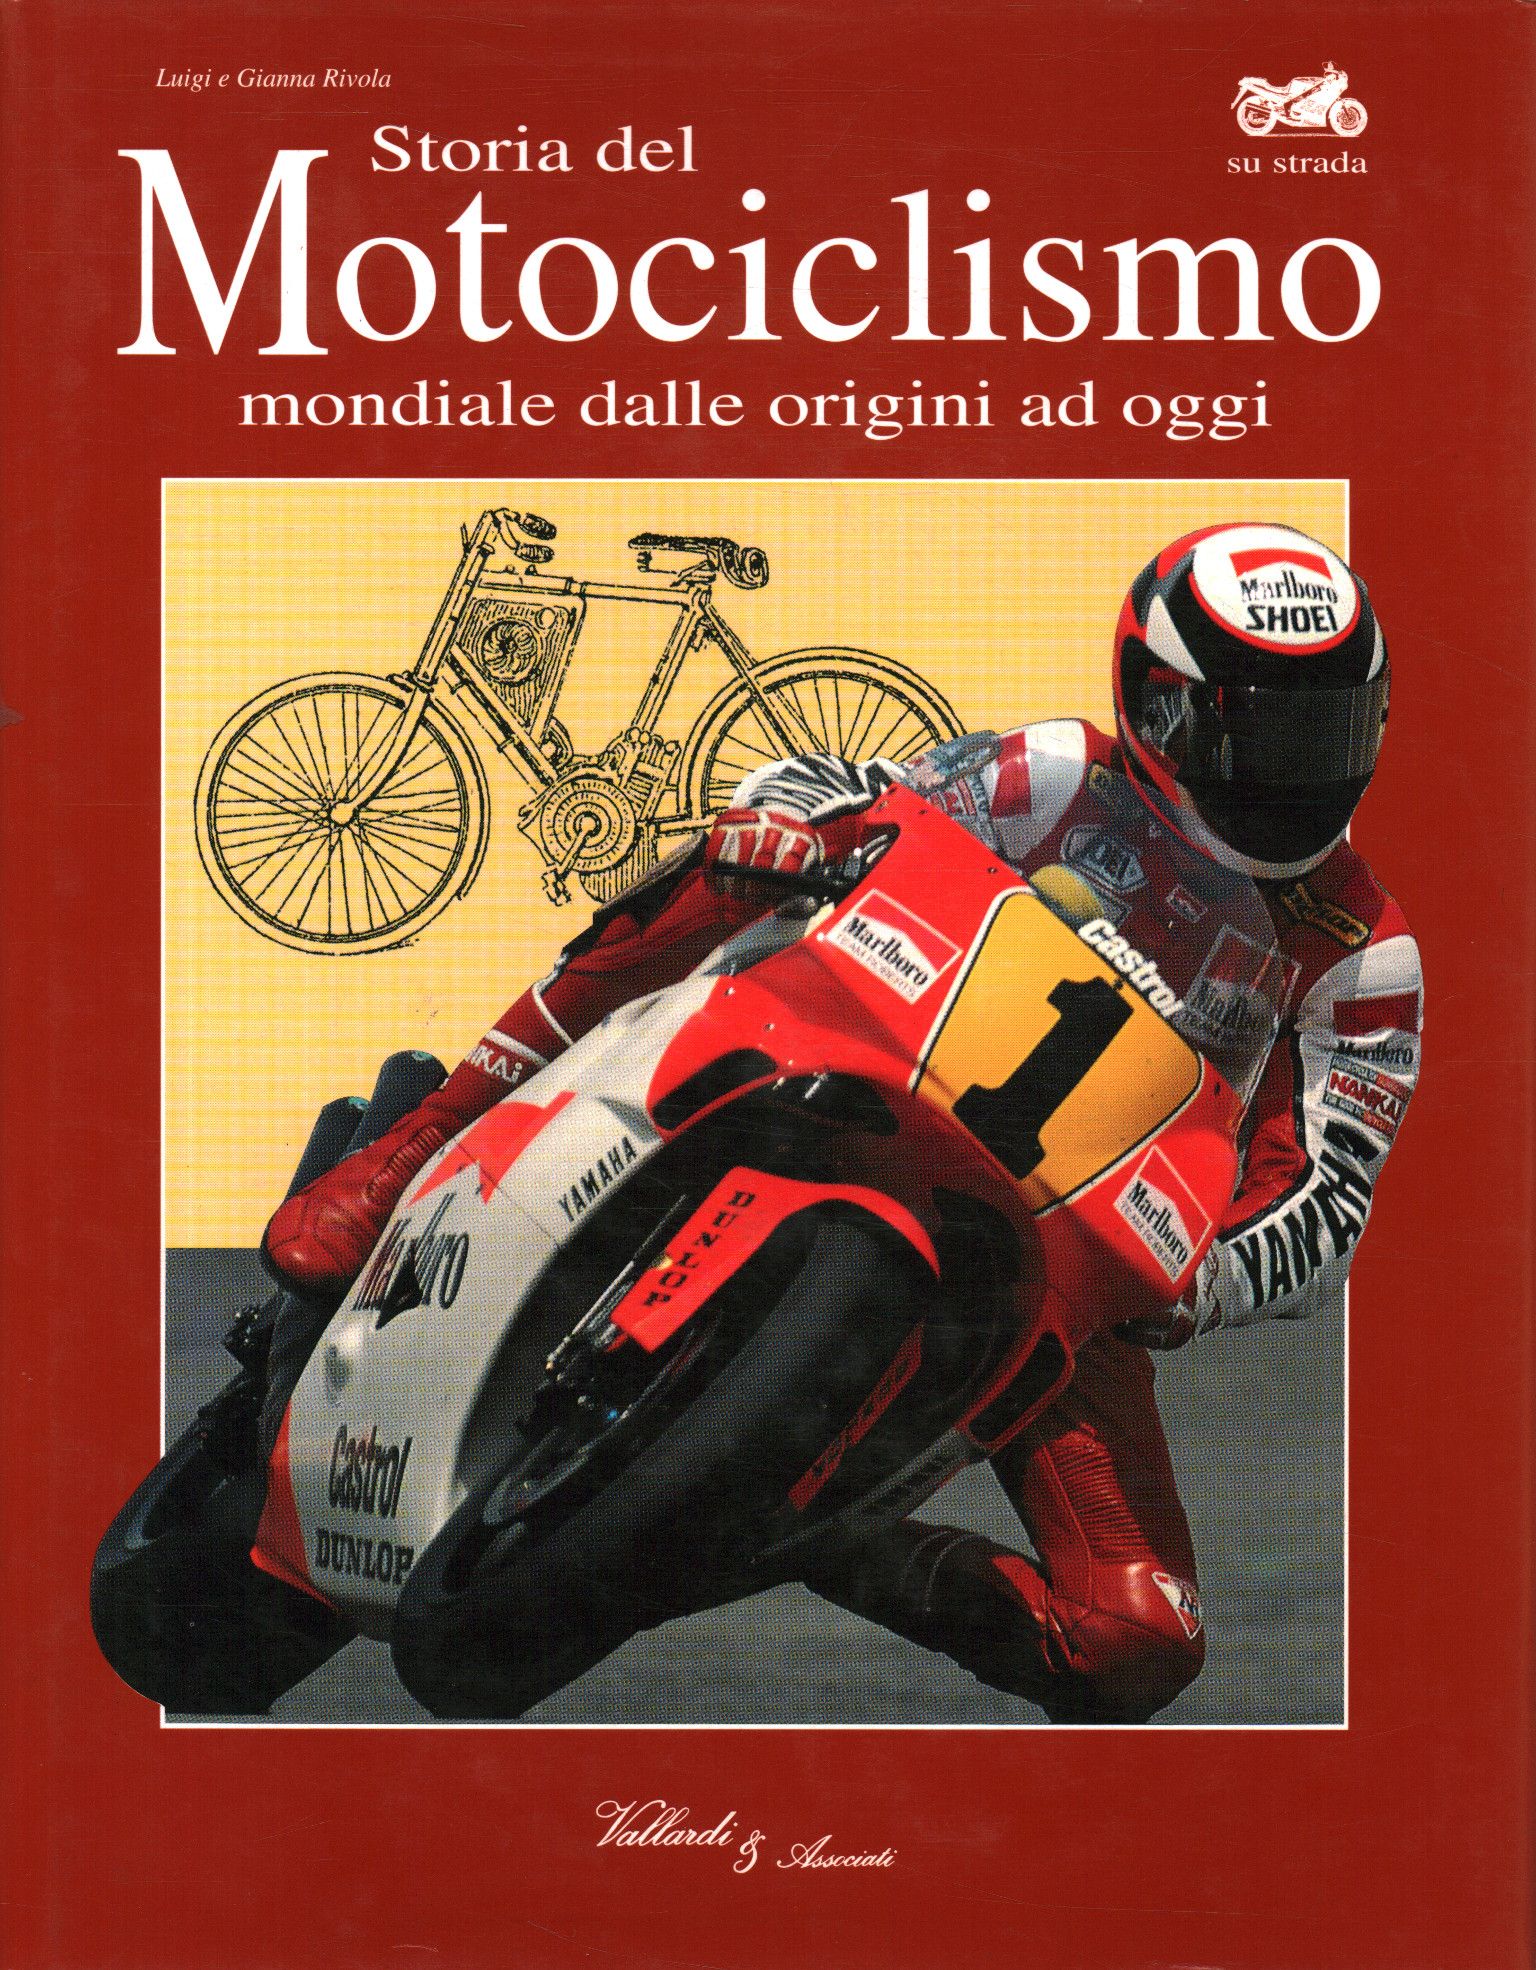 Motorcycling history (world) from% 2, Motorcycling history (world) from% 2